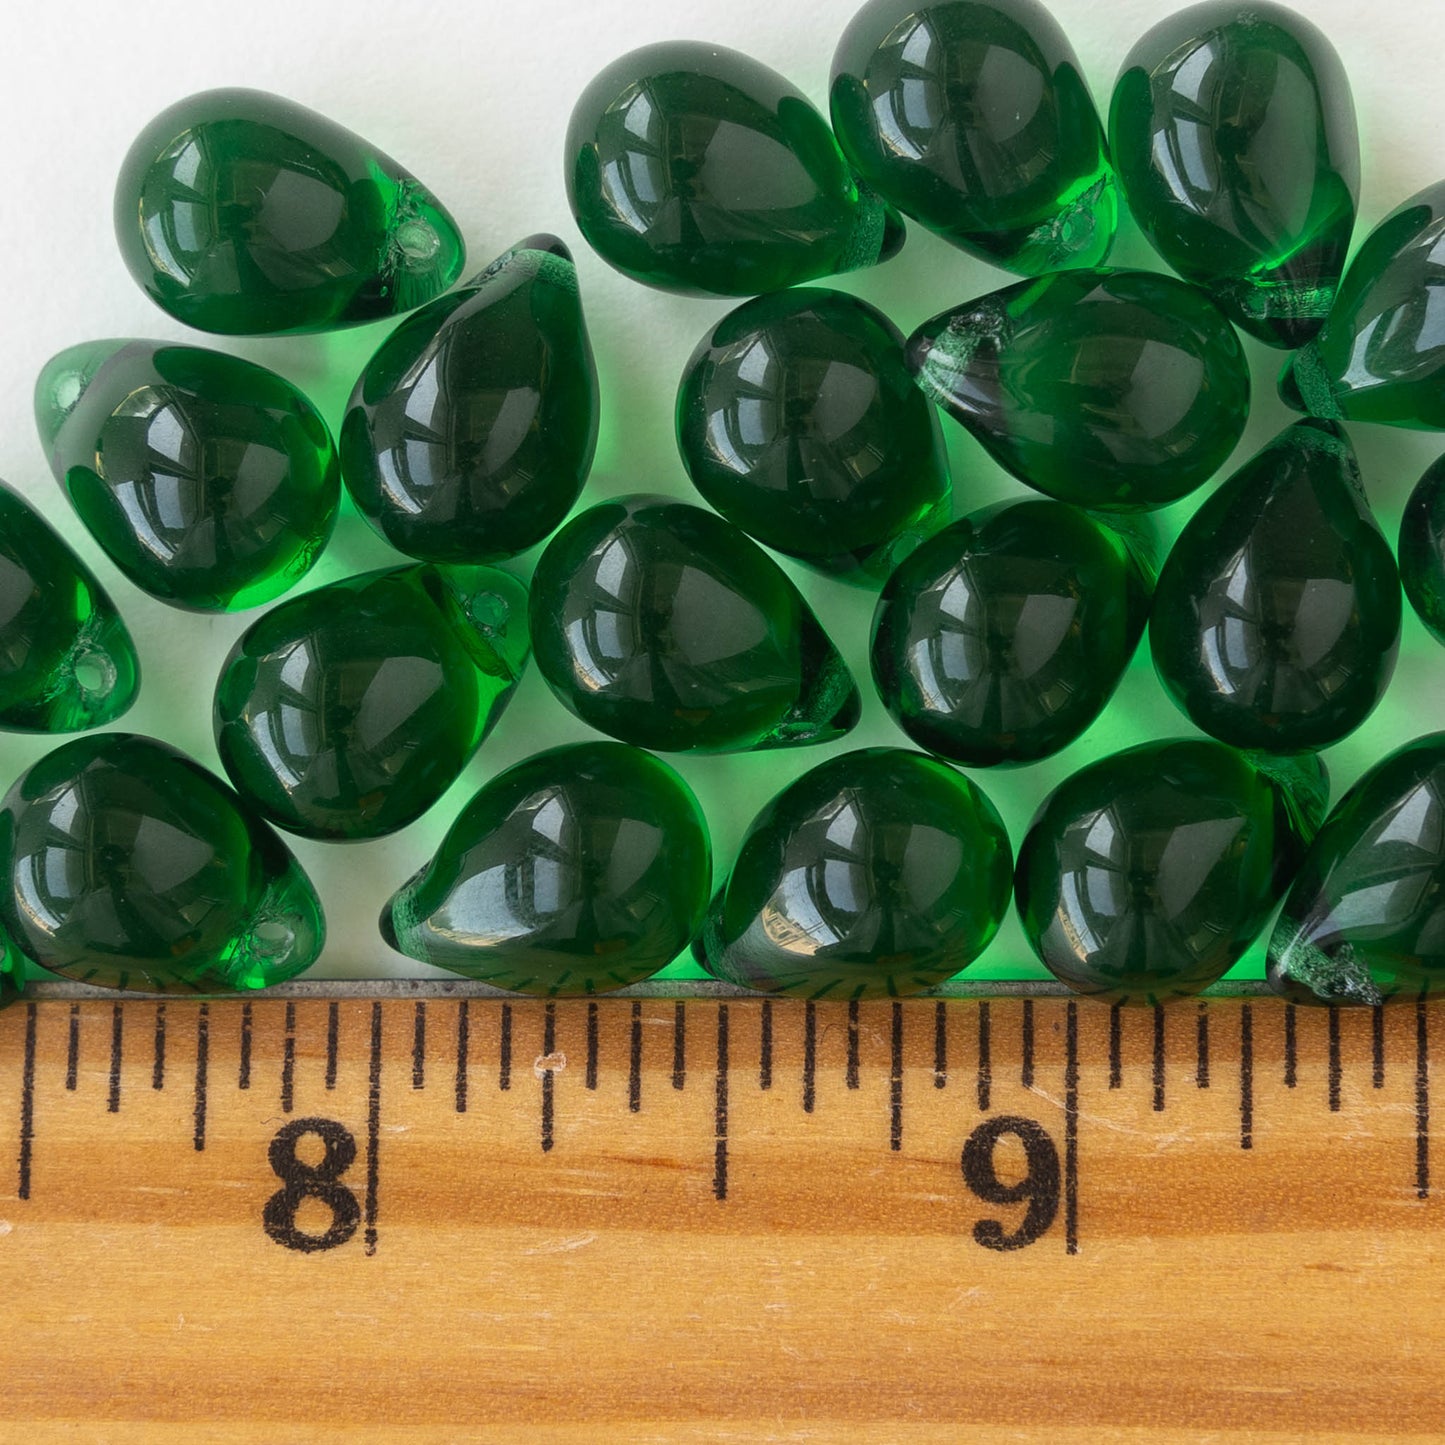 Load image into Gallery viewer, 10x14mm Glass Teardrop Beads - Emerald Green
